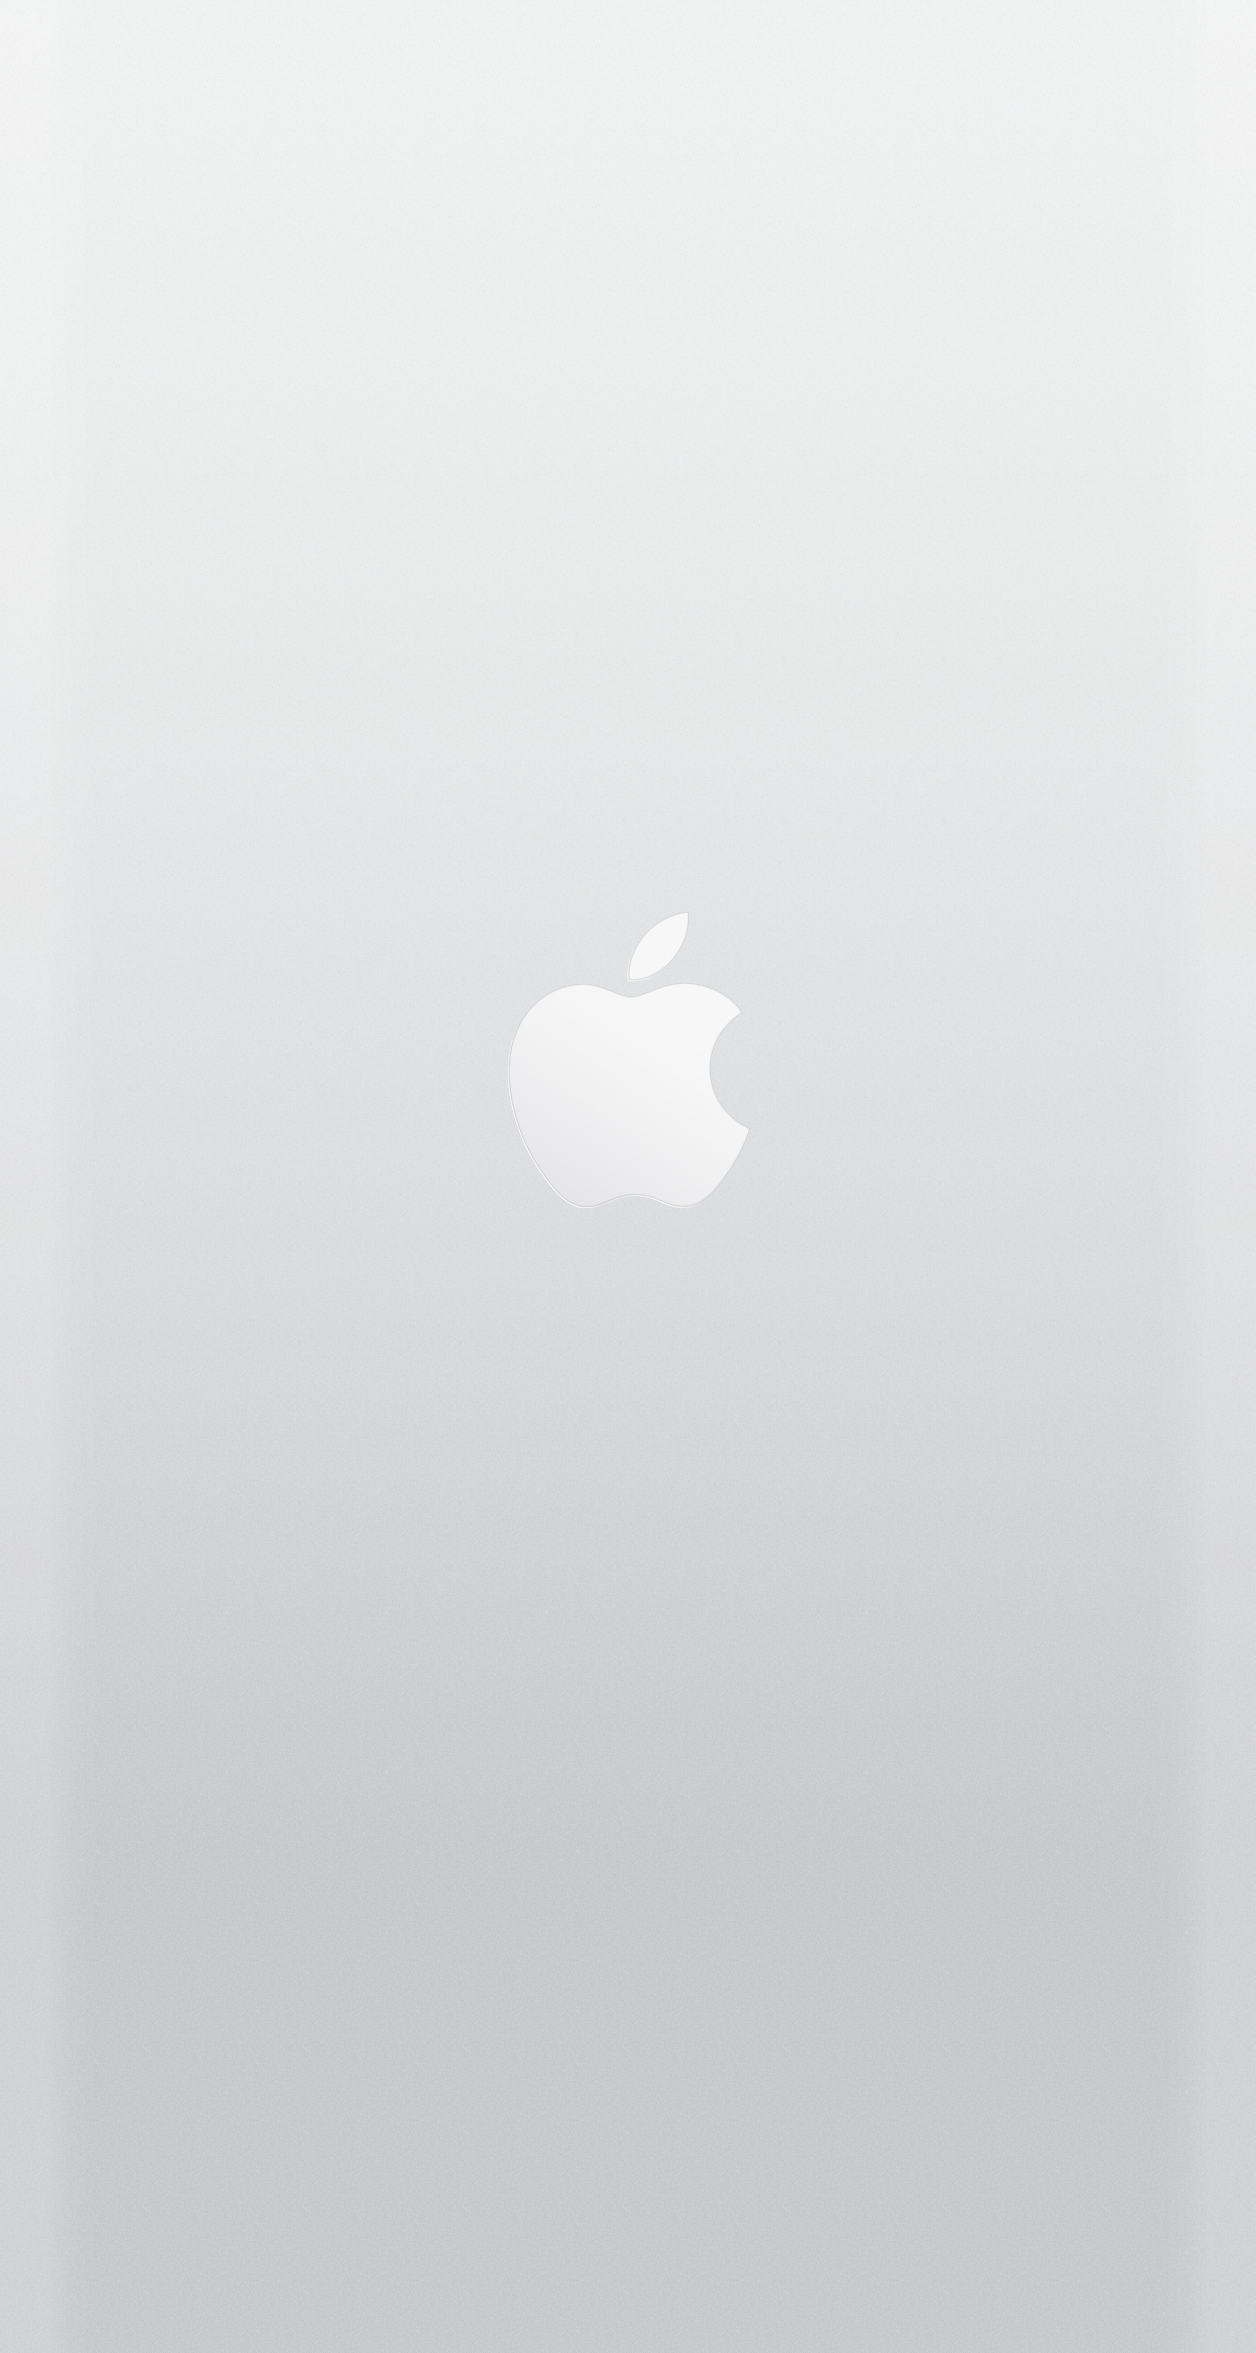 Apple Logo wallpaper for iPhone 6 and iPhone 6 Plus 1256x2353